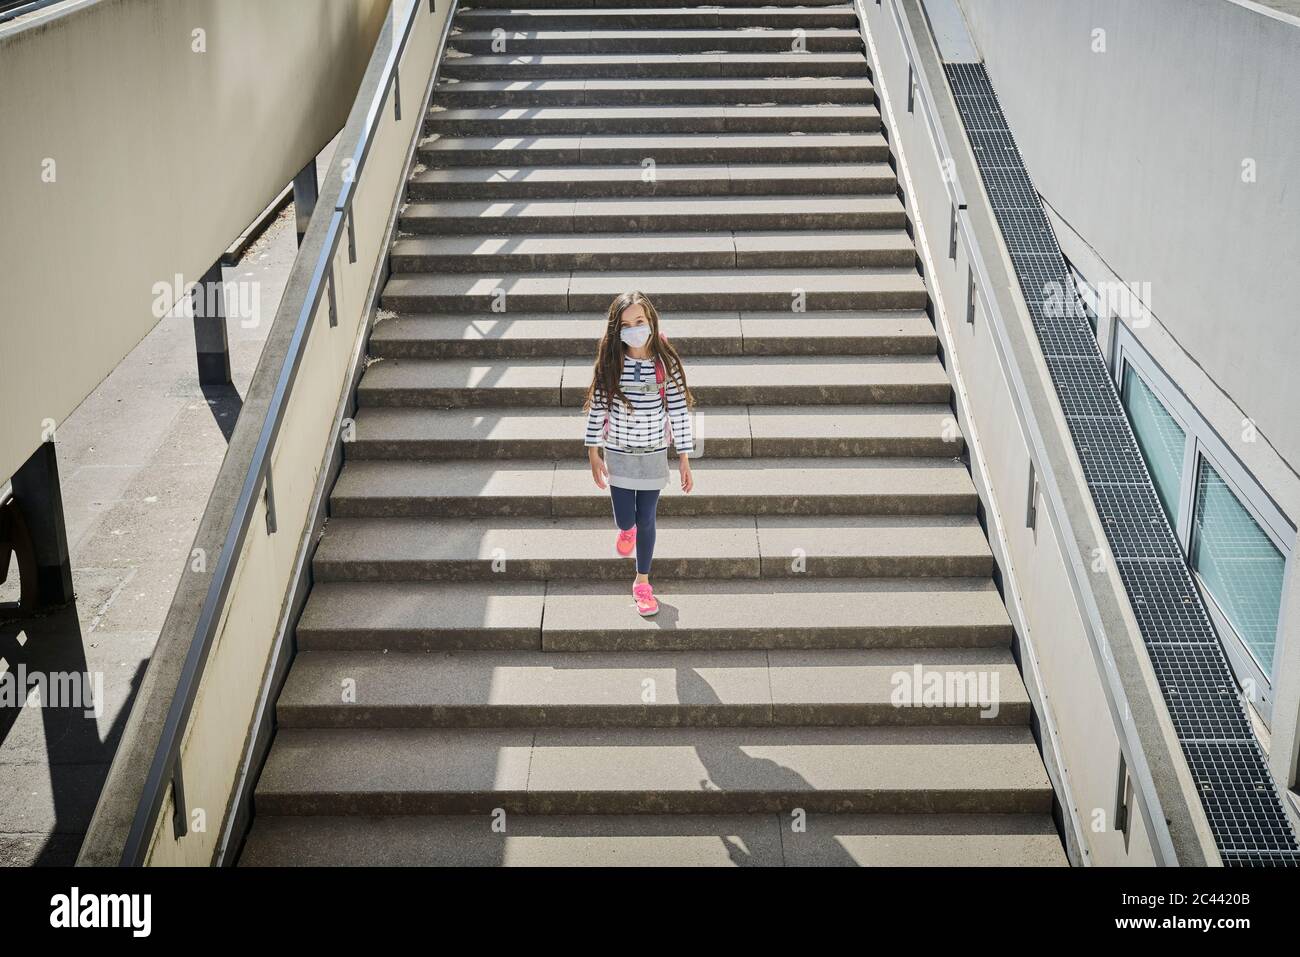 Girl wearing mask and schoolbag walking on stairs Stock Photo